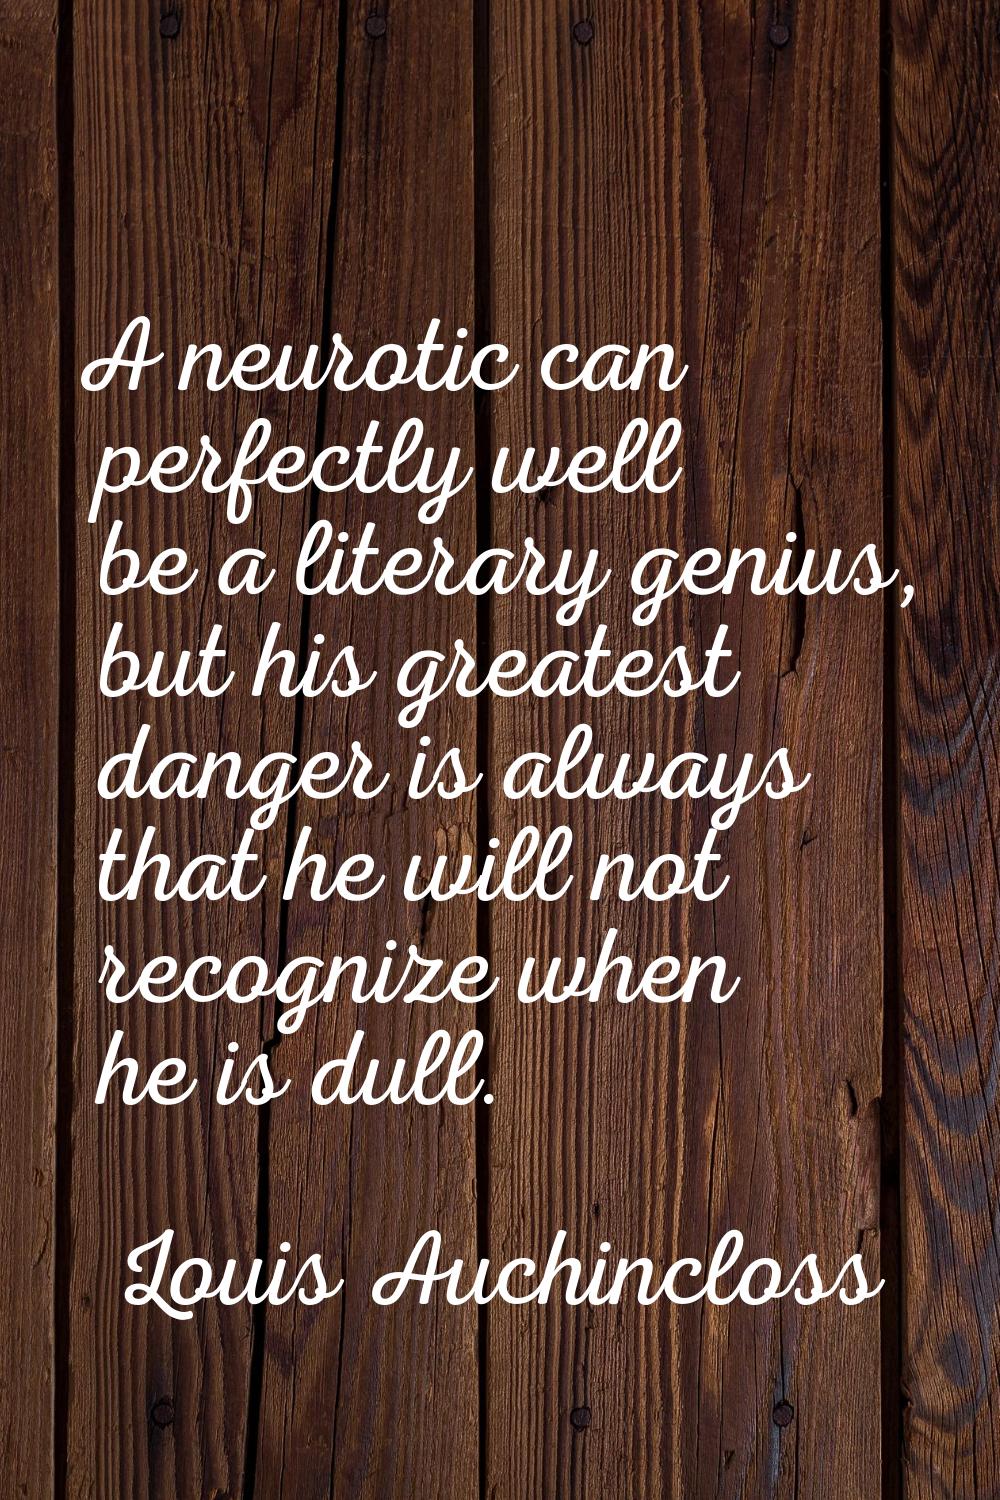 A neurotic can perfectly well be a literary genius, but his greatest danger is always that he will 